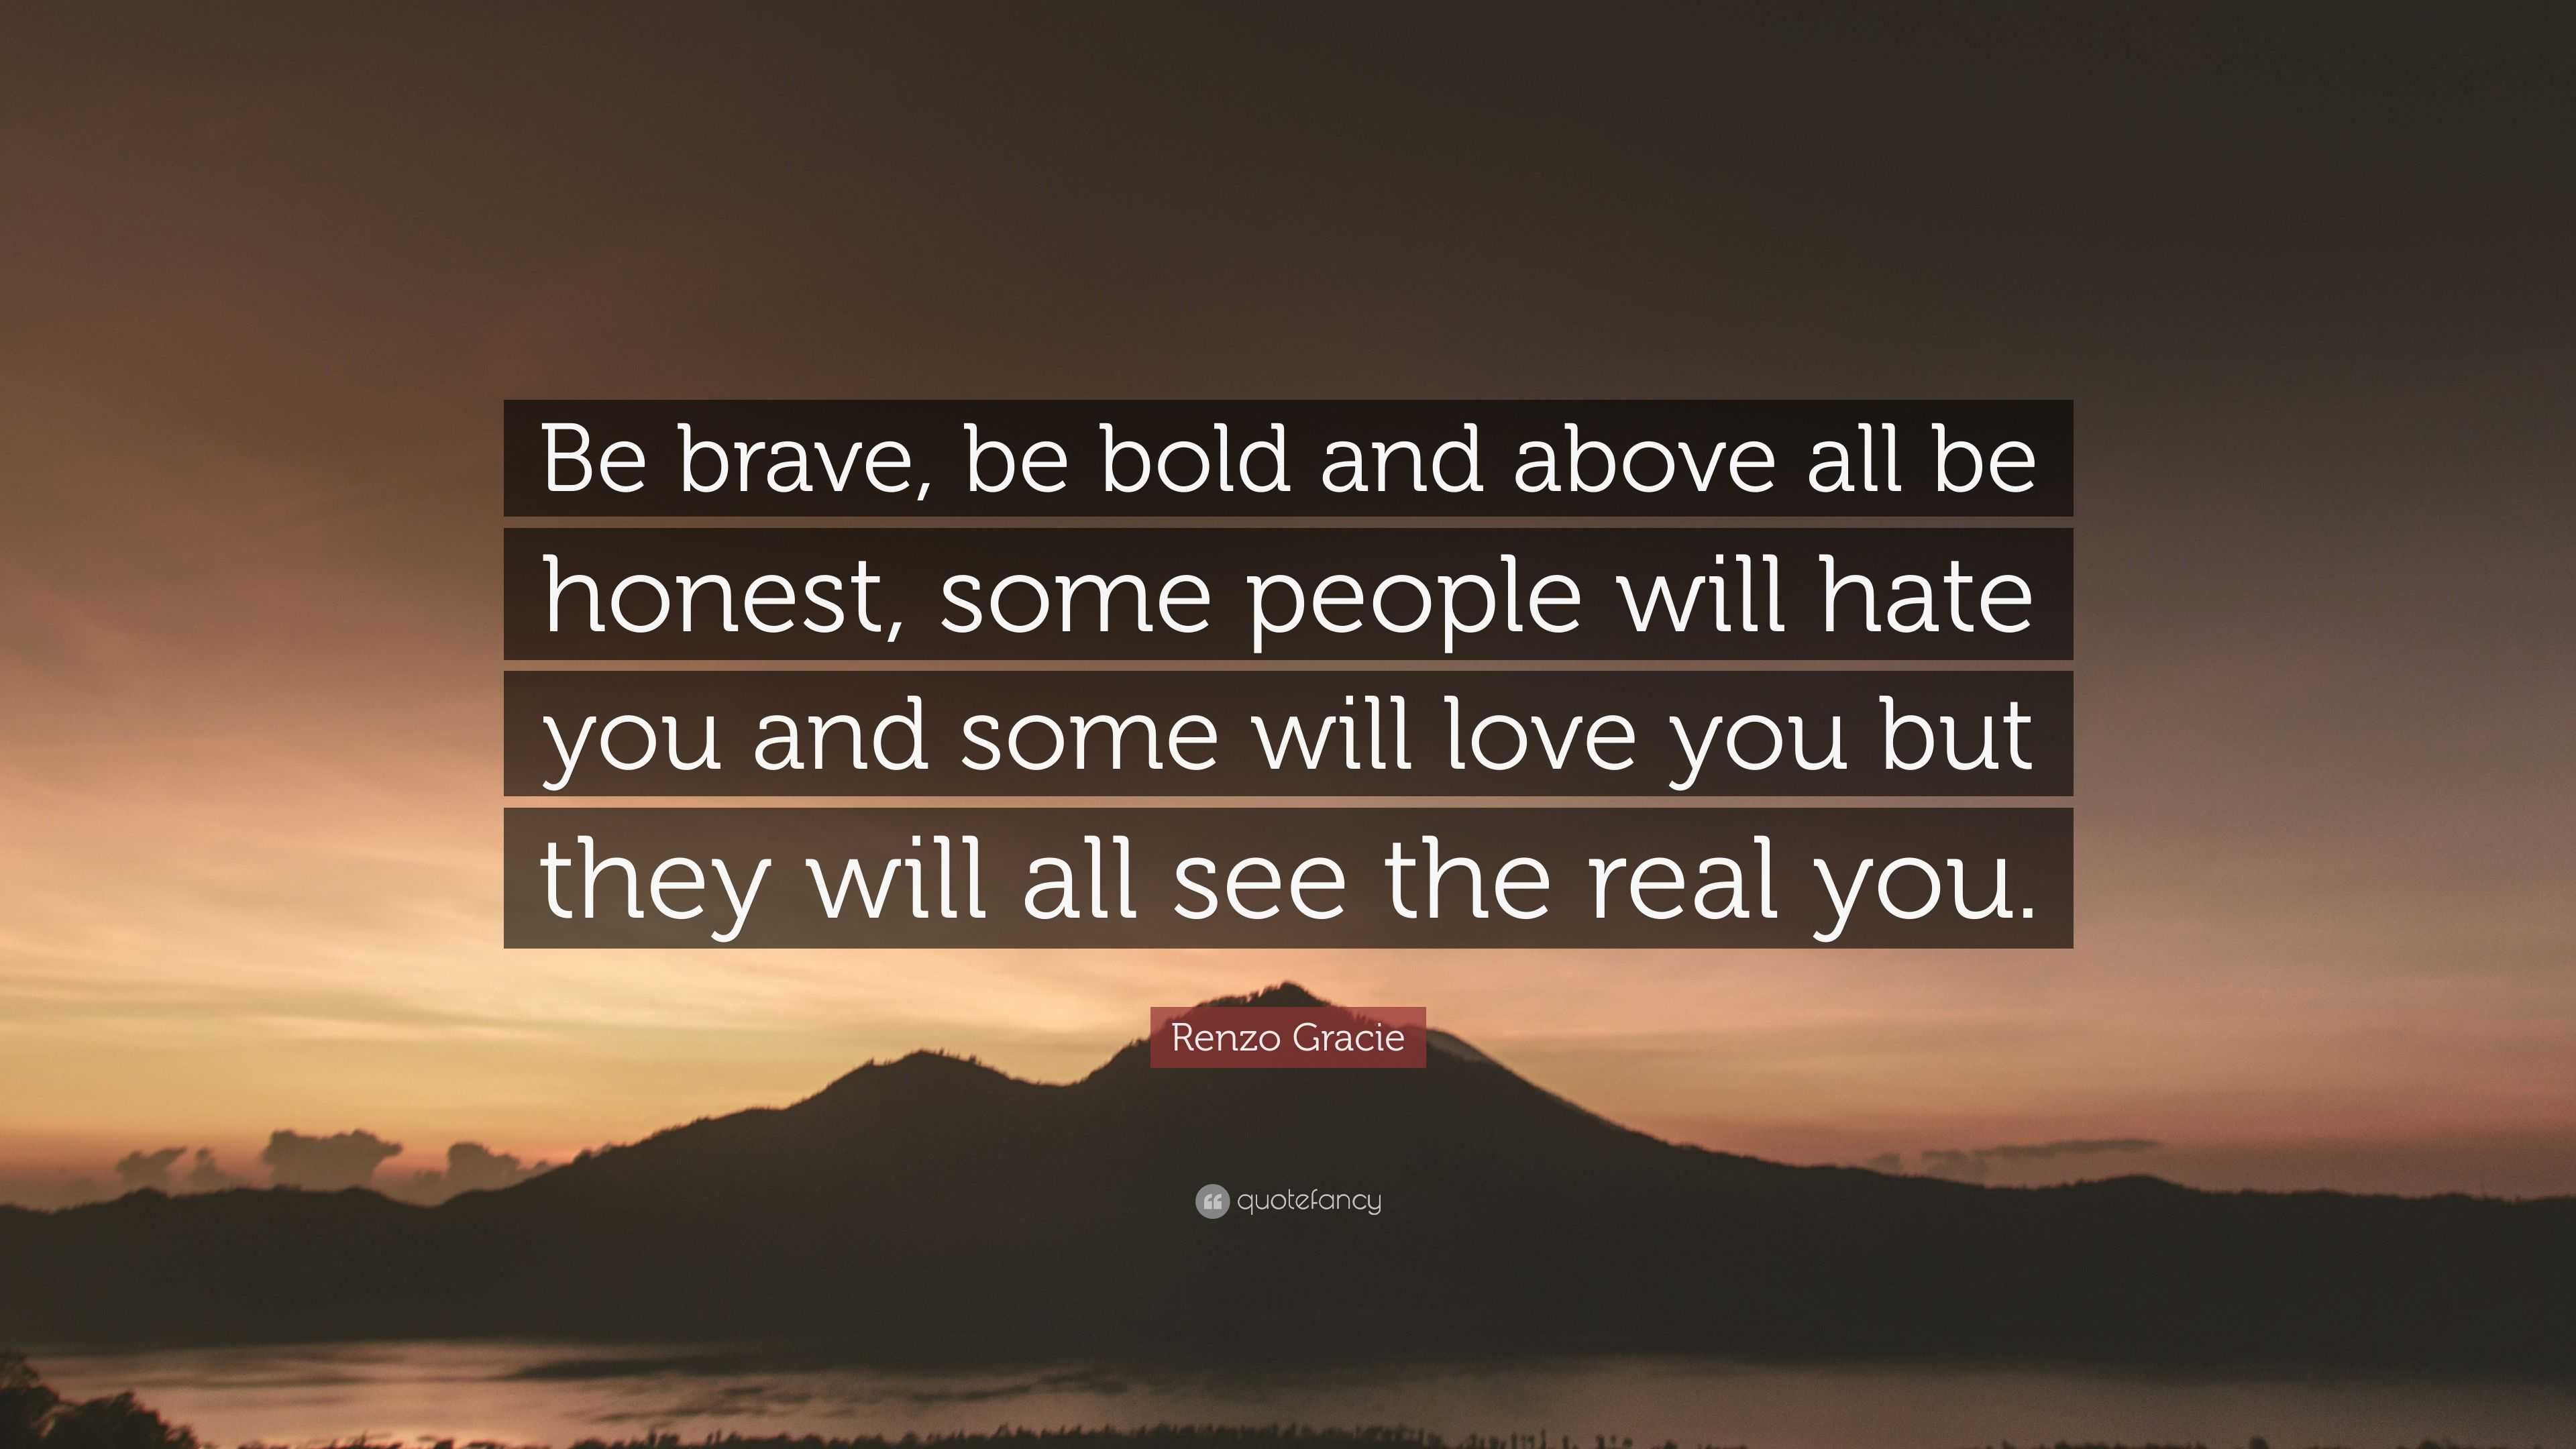 Renzo Gracie Quote “Be brave be bold and above all be honest